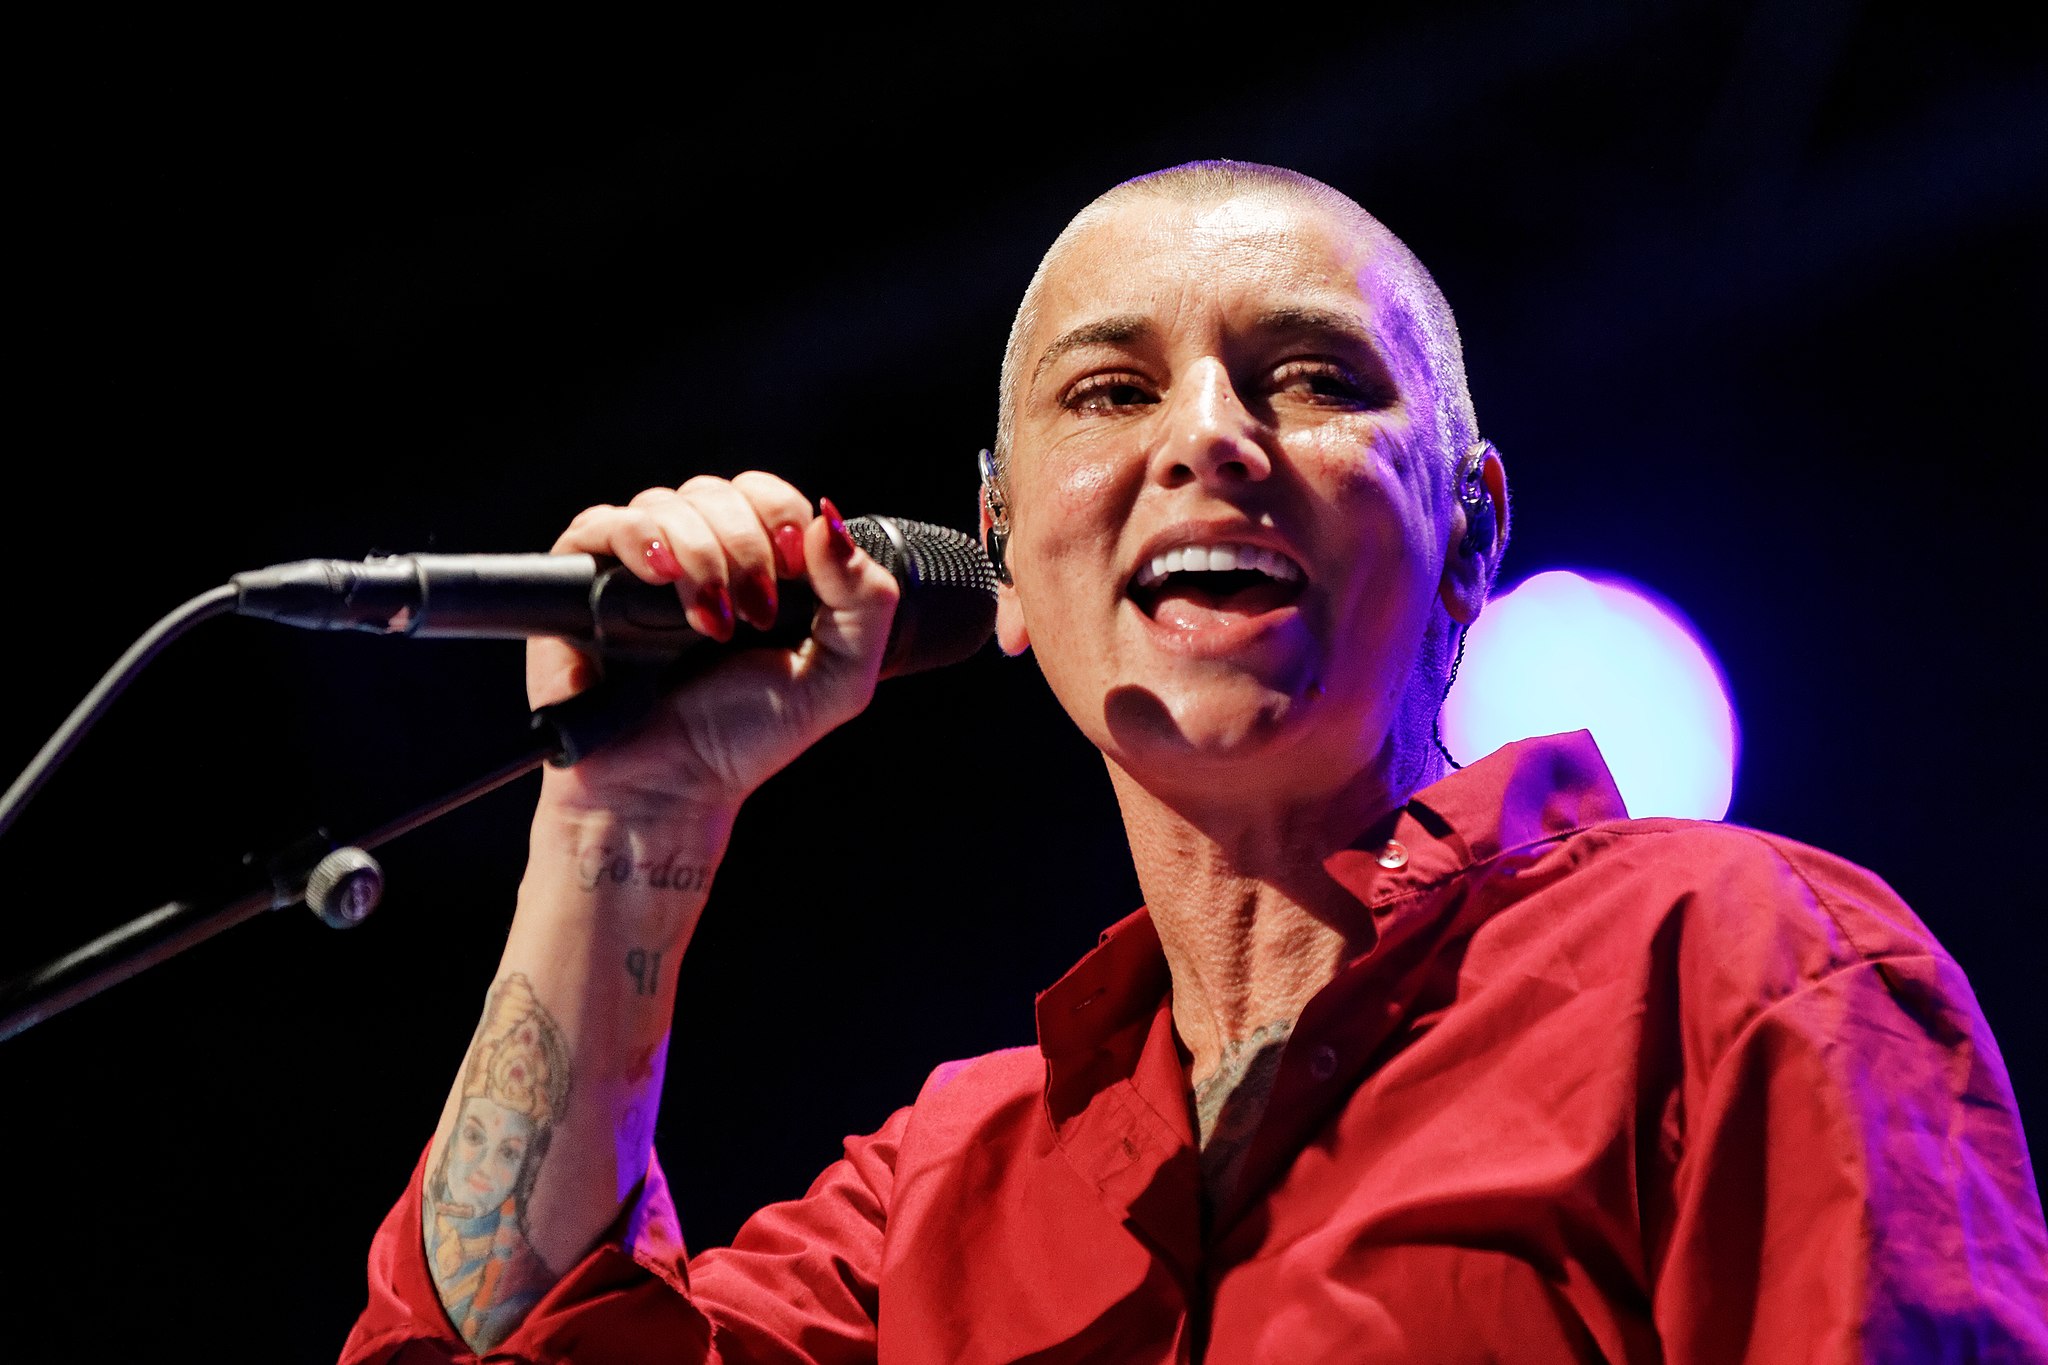 Sinéad O’Connor in concert at the Festival de Cornouaille in 2014. Image by Thesupermat, CC BY-SA 3.0, via Wikimedia Commons.